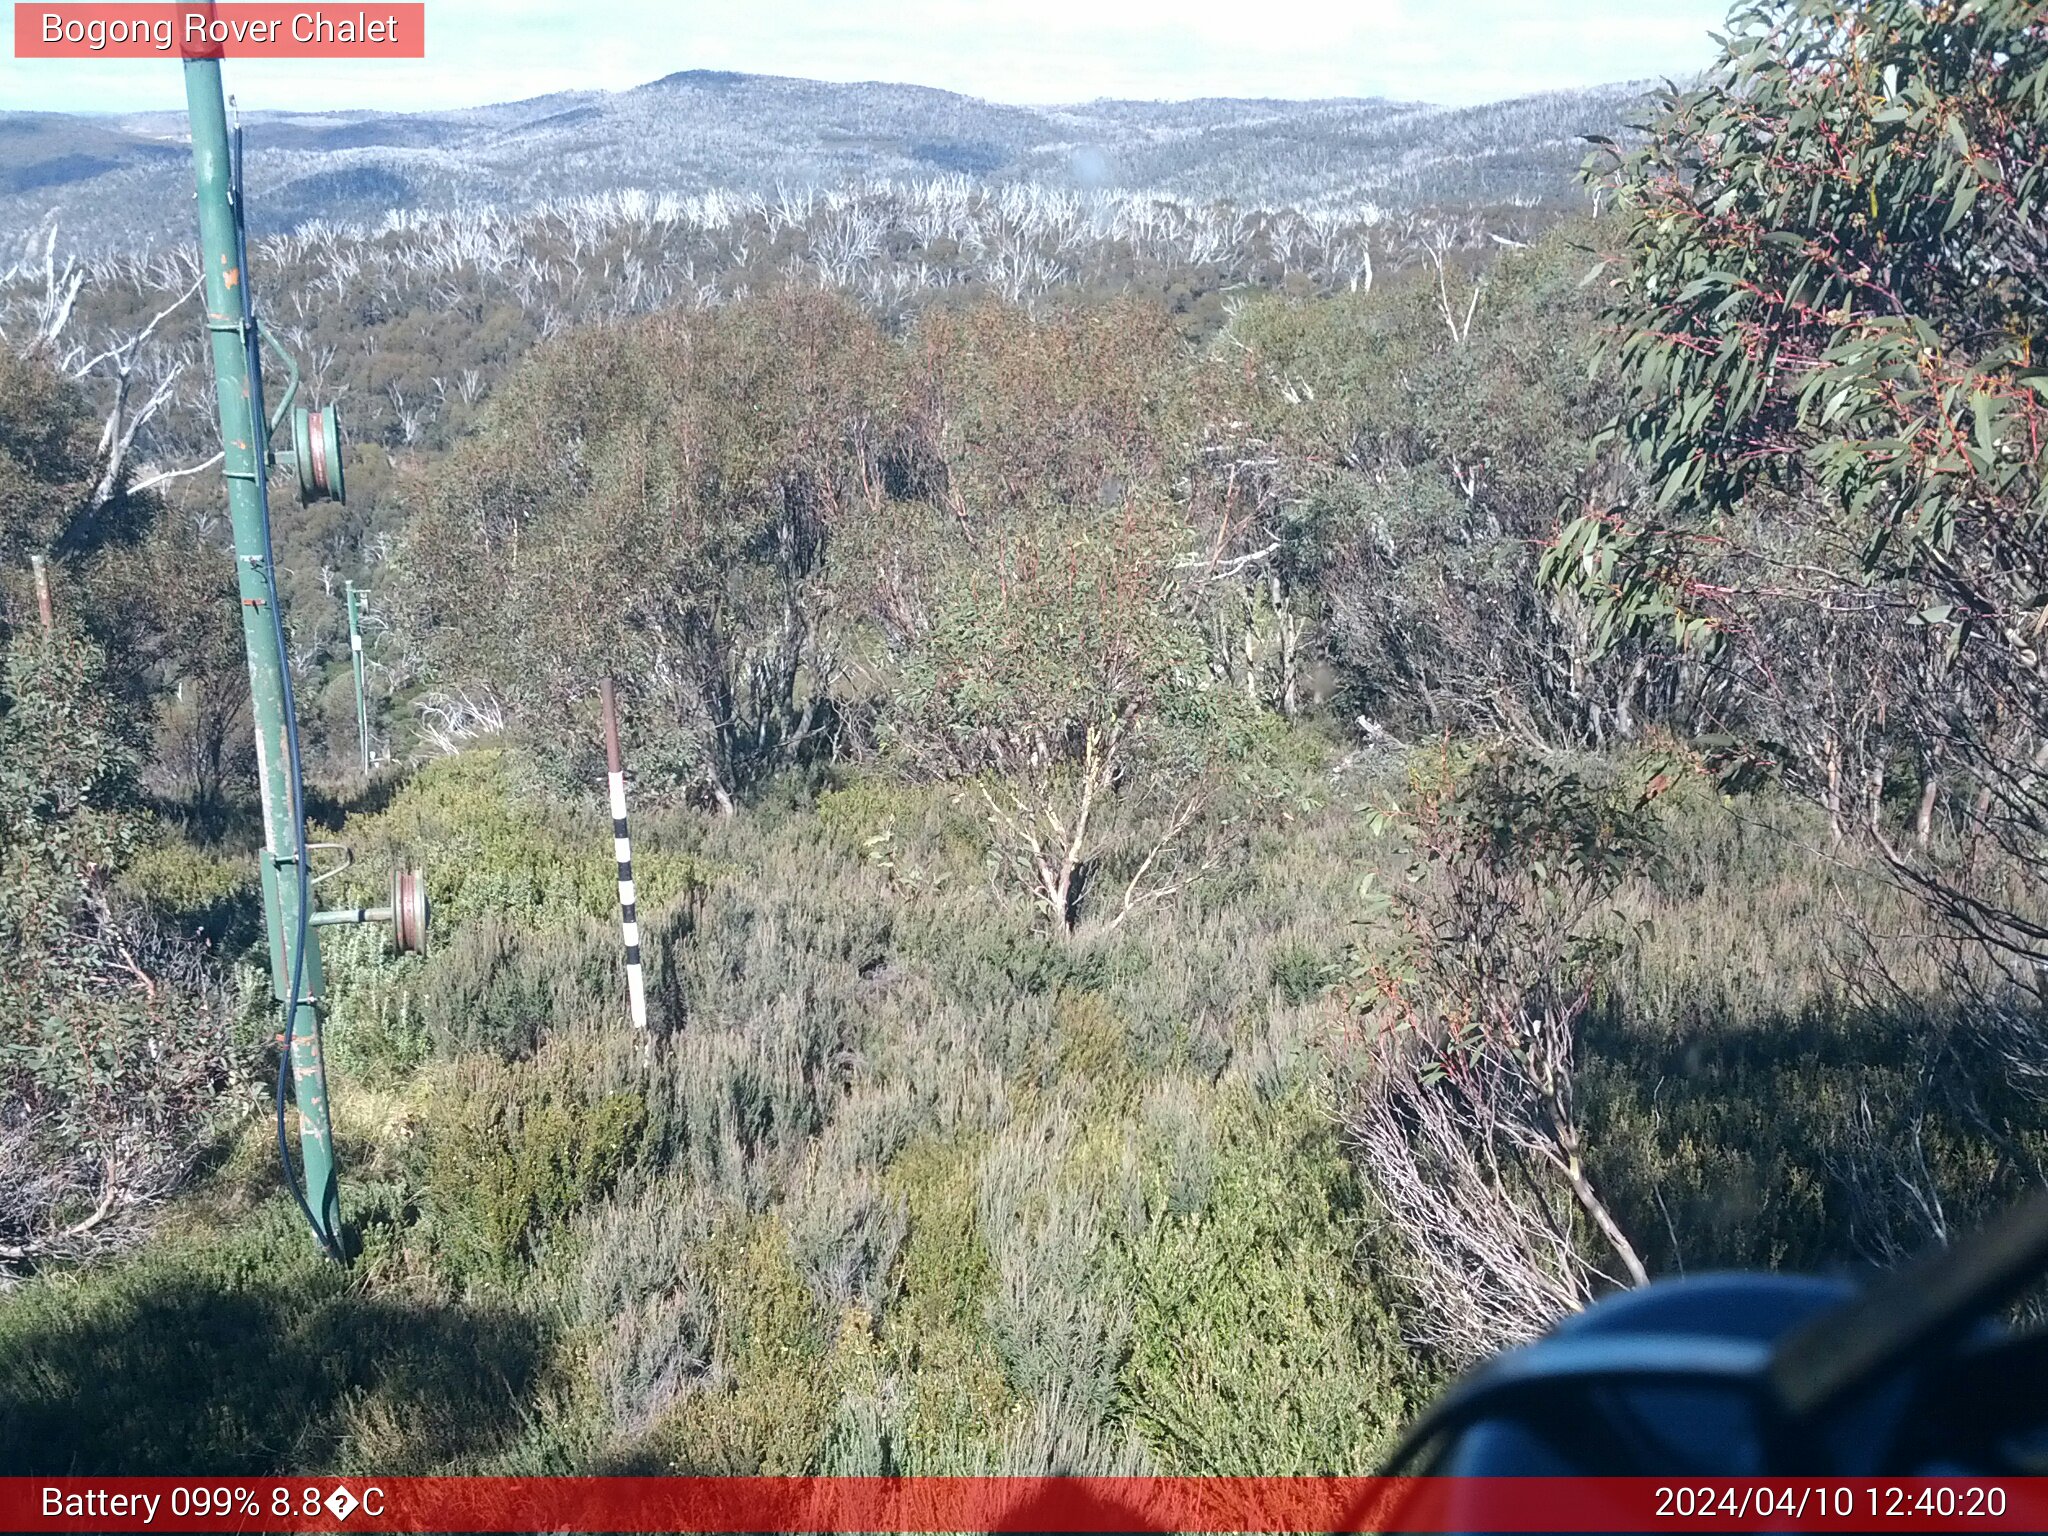 Bogong Web Cam 12:40pm Wednesday 10th of April 2024